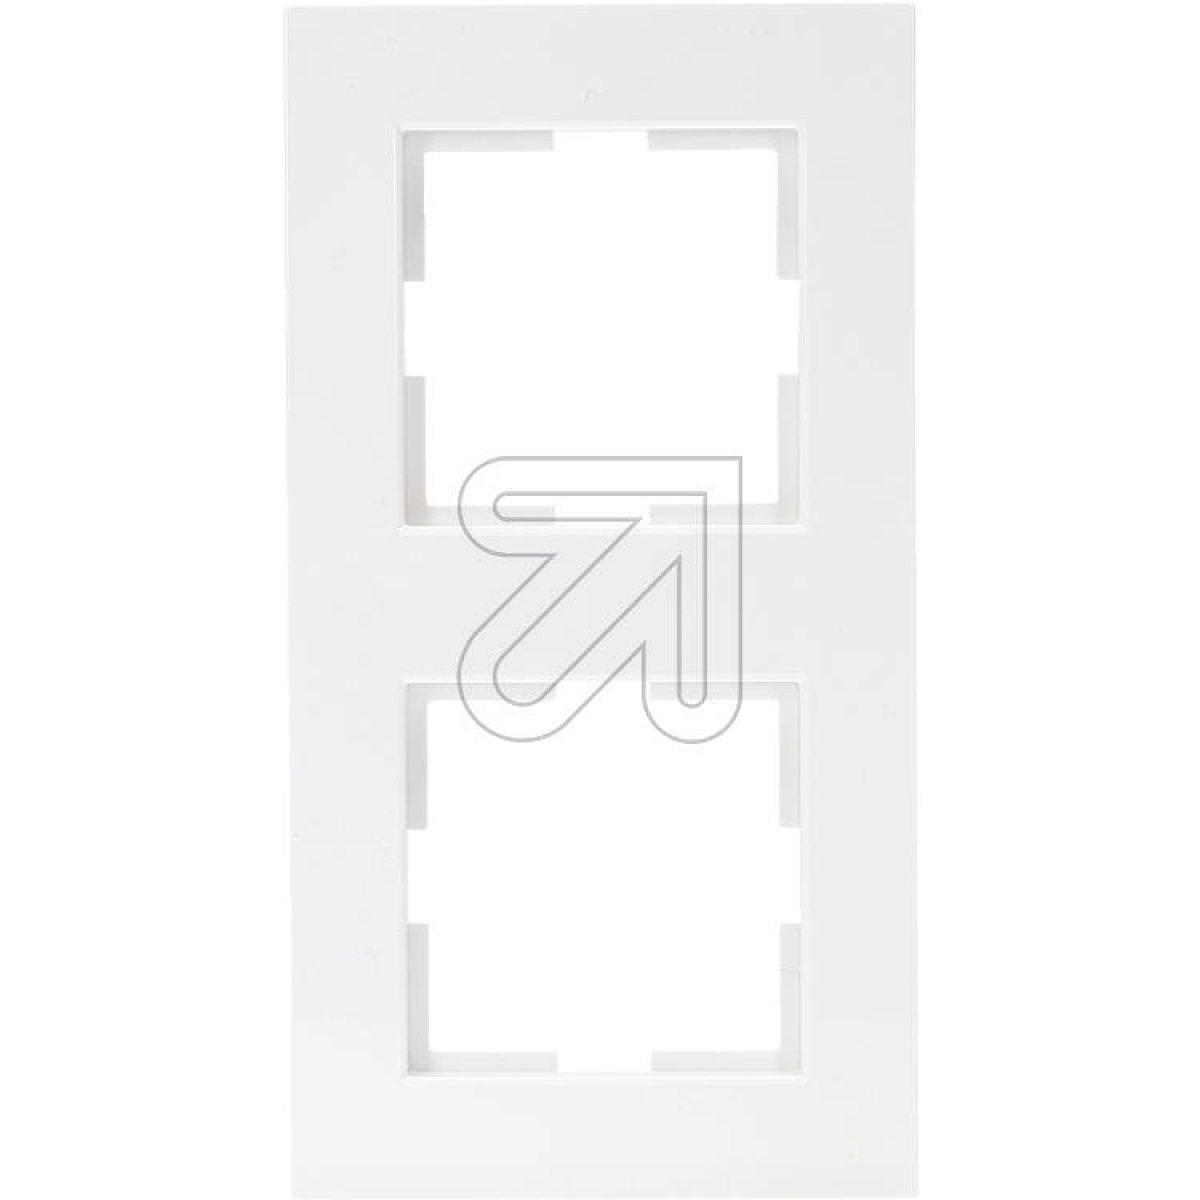 EGBTrolley cover frame, double white 90960261/92501901Article-No: 079175